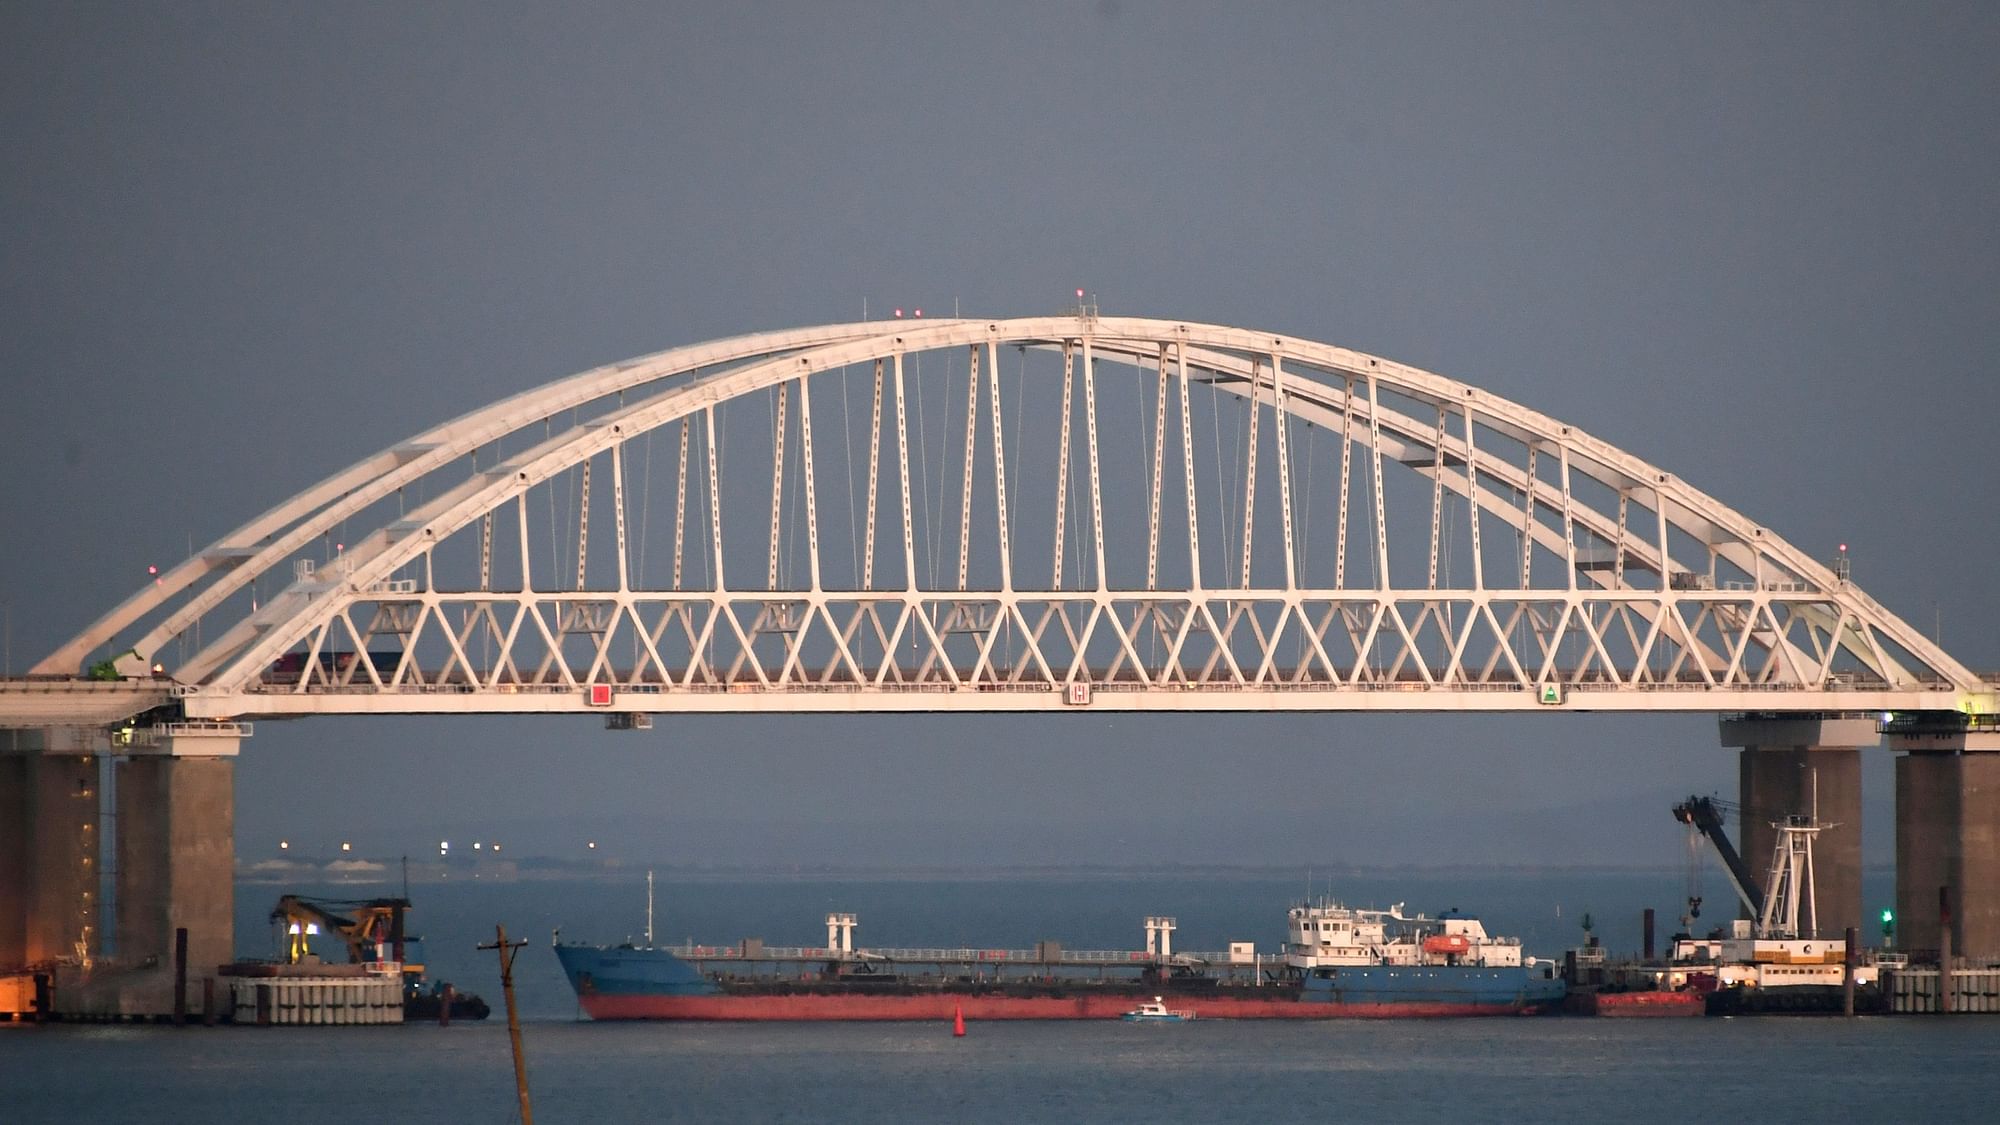 Russia and Ukraine traded accusations over another incident involving the three vessels.